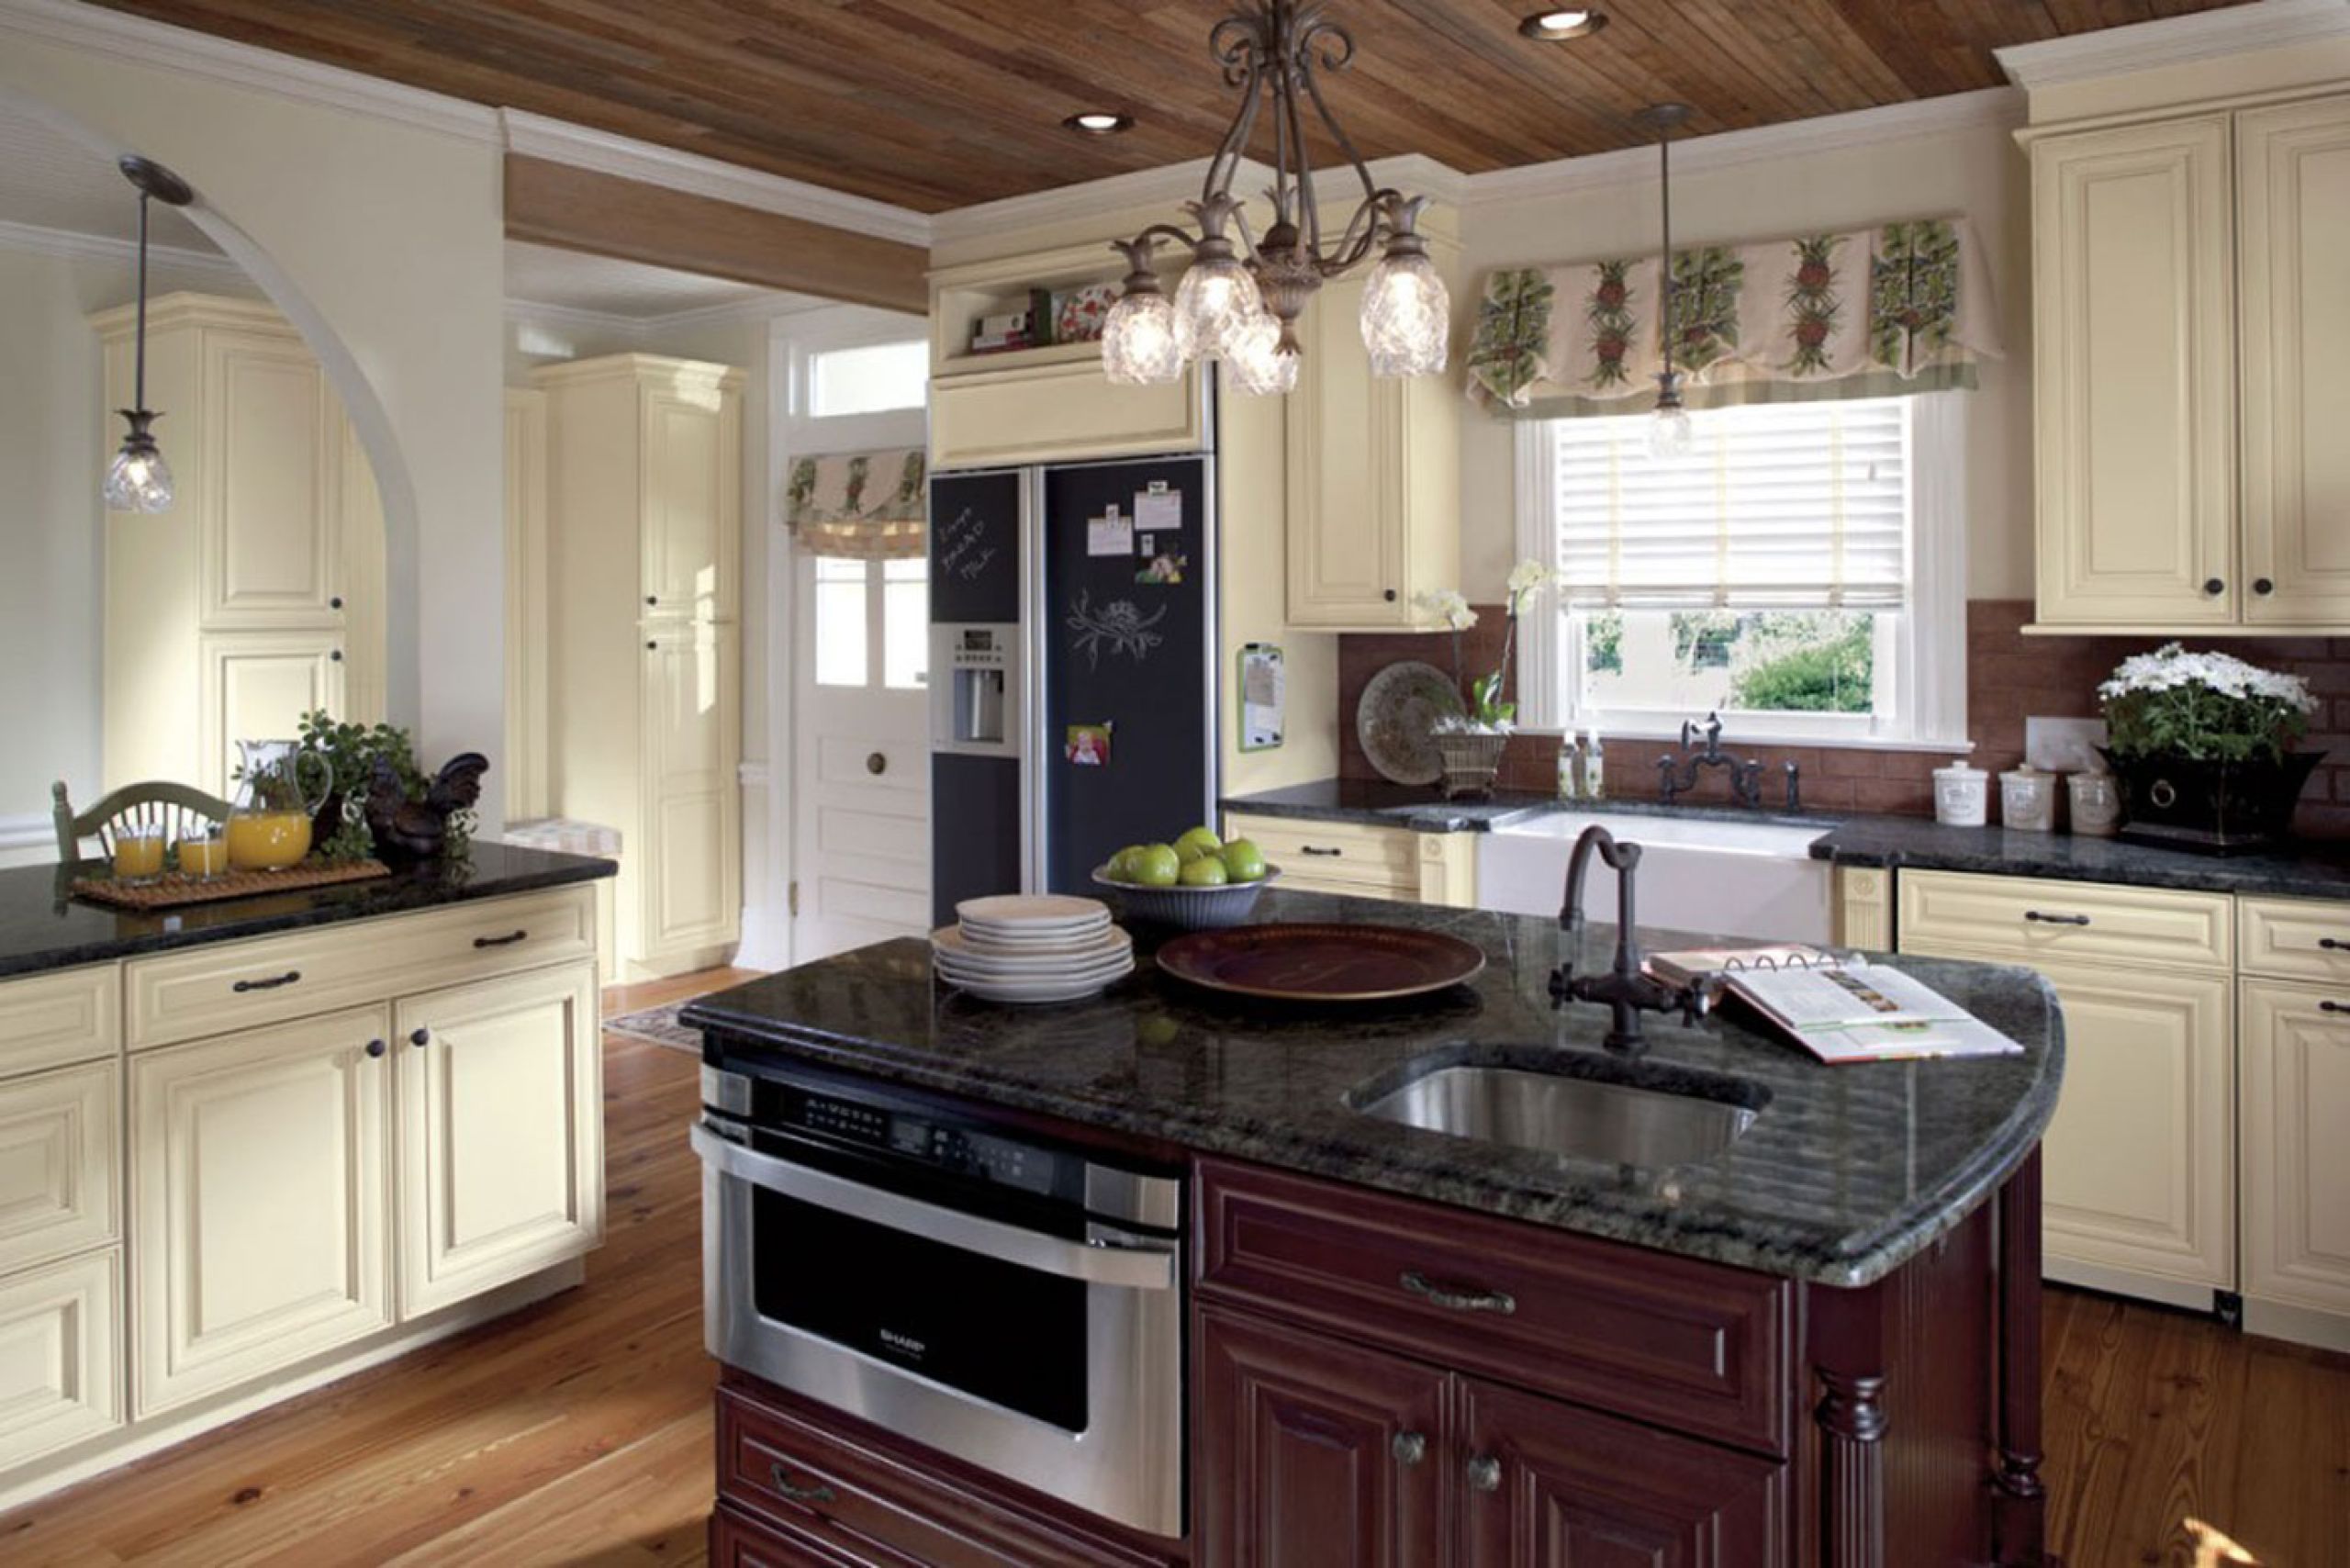 The beauty of dark cambria is a popular choice for countertops.